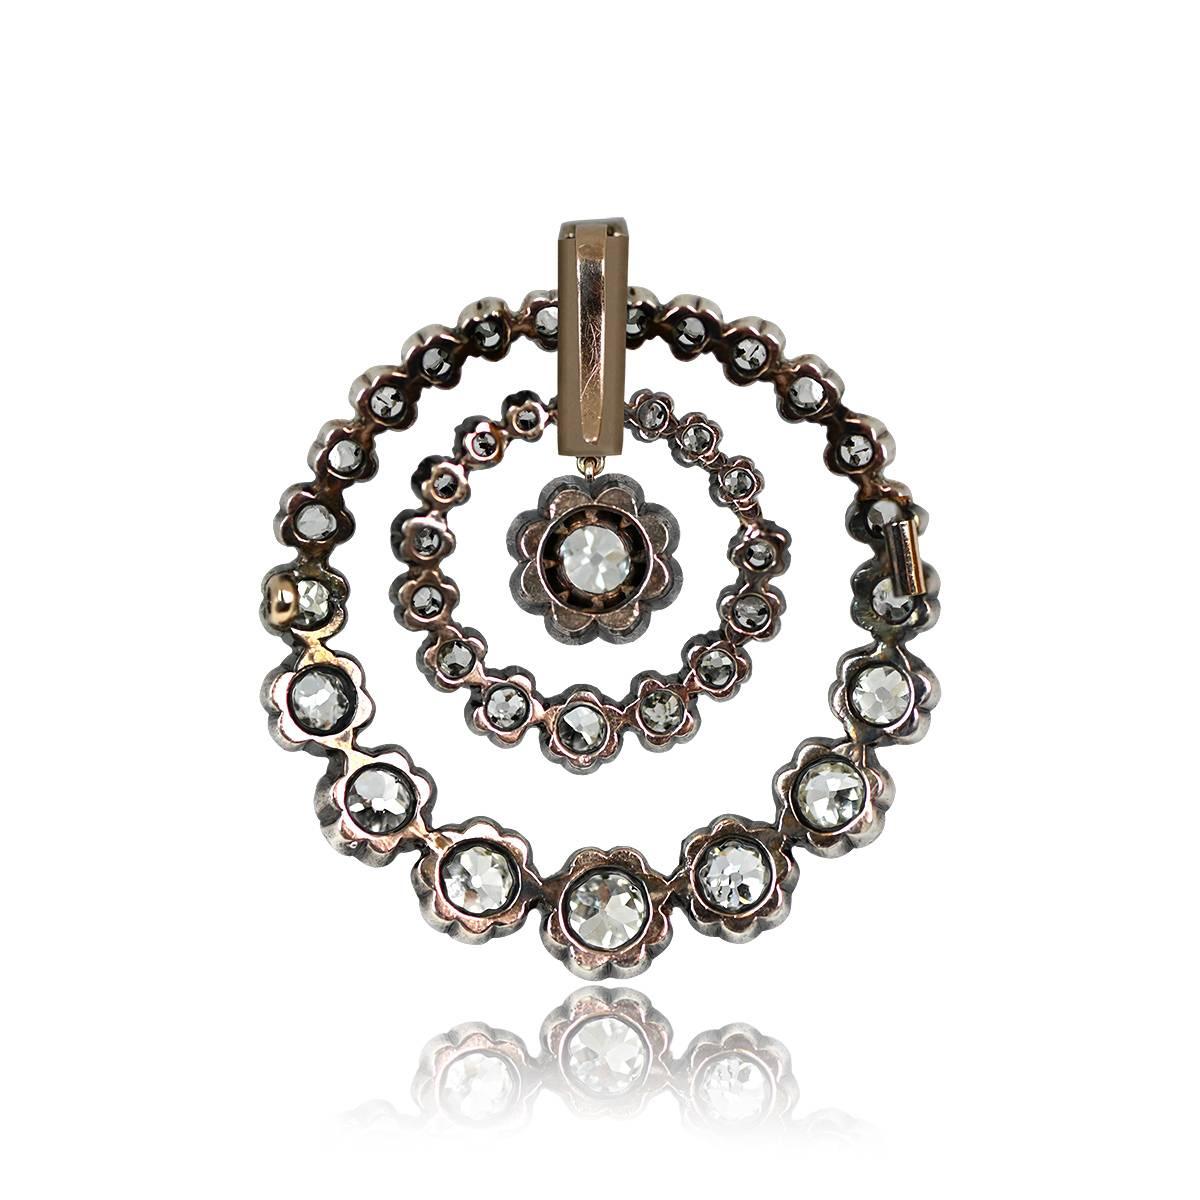 An authentic Victorian-era pendant featuring an antique cushion-cut diamond at the center, weighing approximately 0.50 carats, surrounded by two rounds. Crafted in silver on gold, this exquisite brooch dates back to the 1880s.
The total approximate